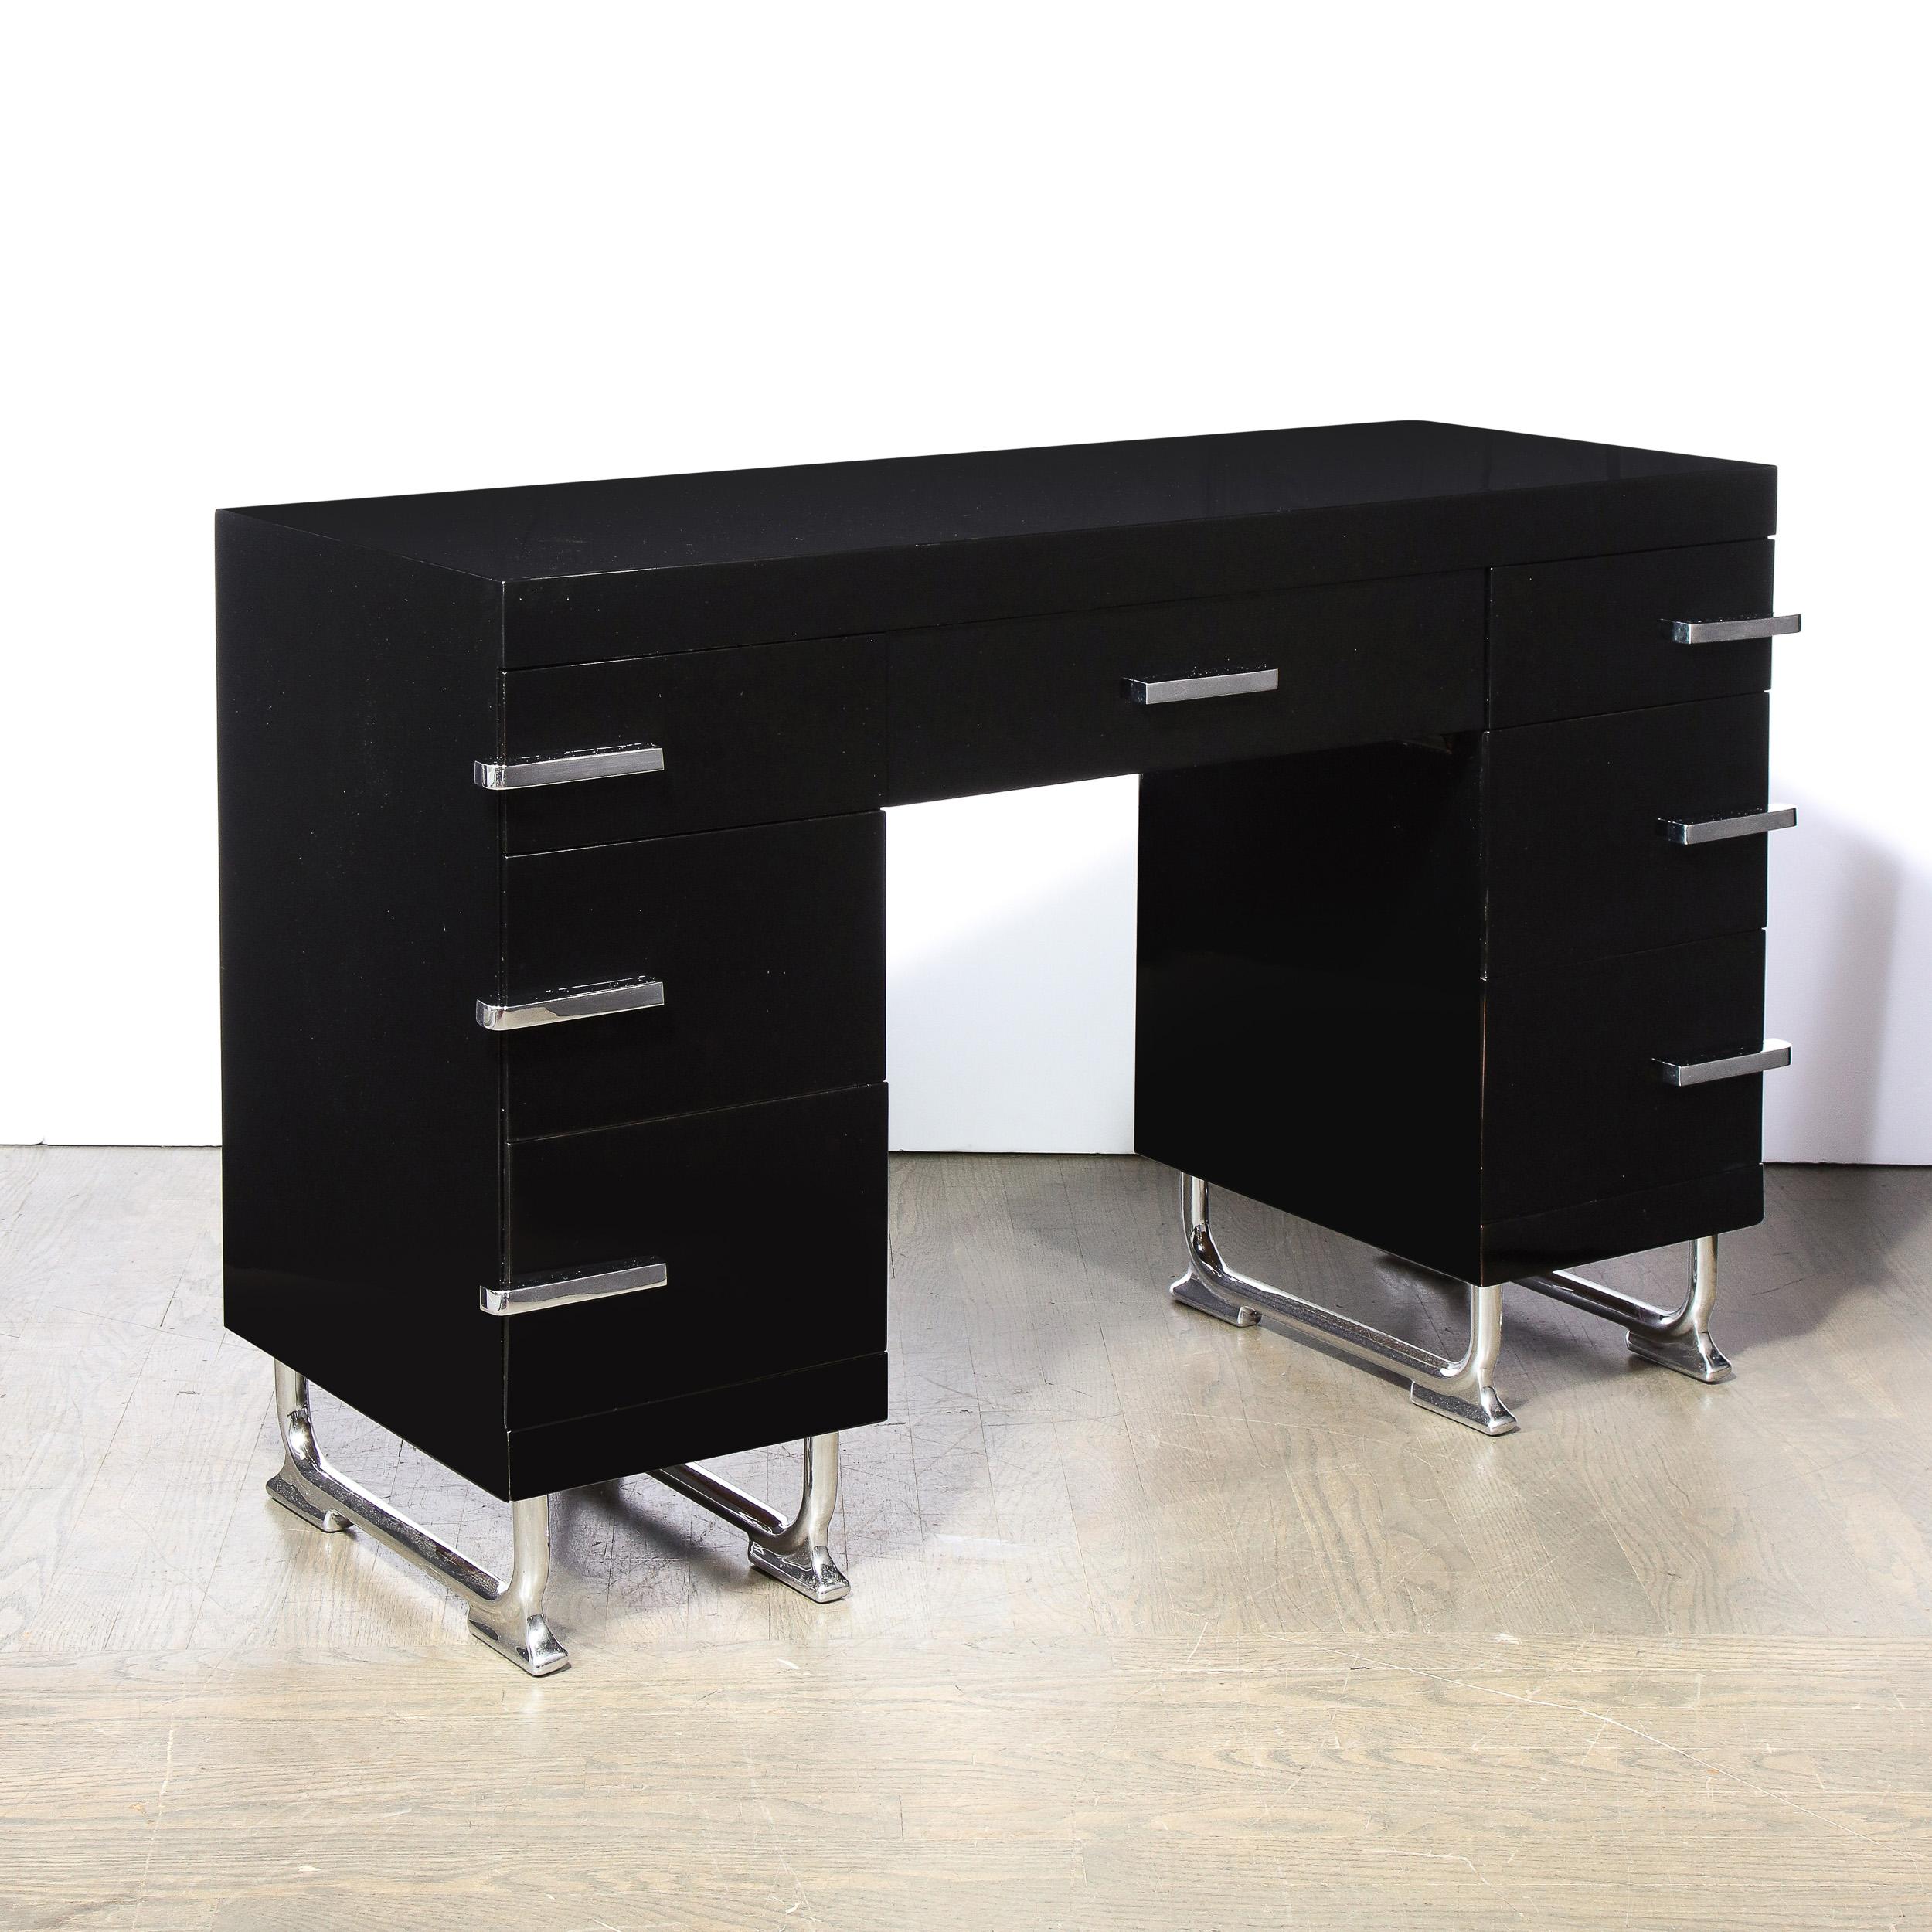 This stunning Art Deco Machine Age black Lacquer desk was realized in the United States, circa 1935. It offers a central drawer with three additional drawers on each side all fitted with streamlined chrome pulls. The piece sits on a stylized